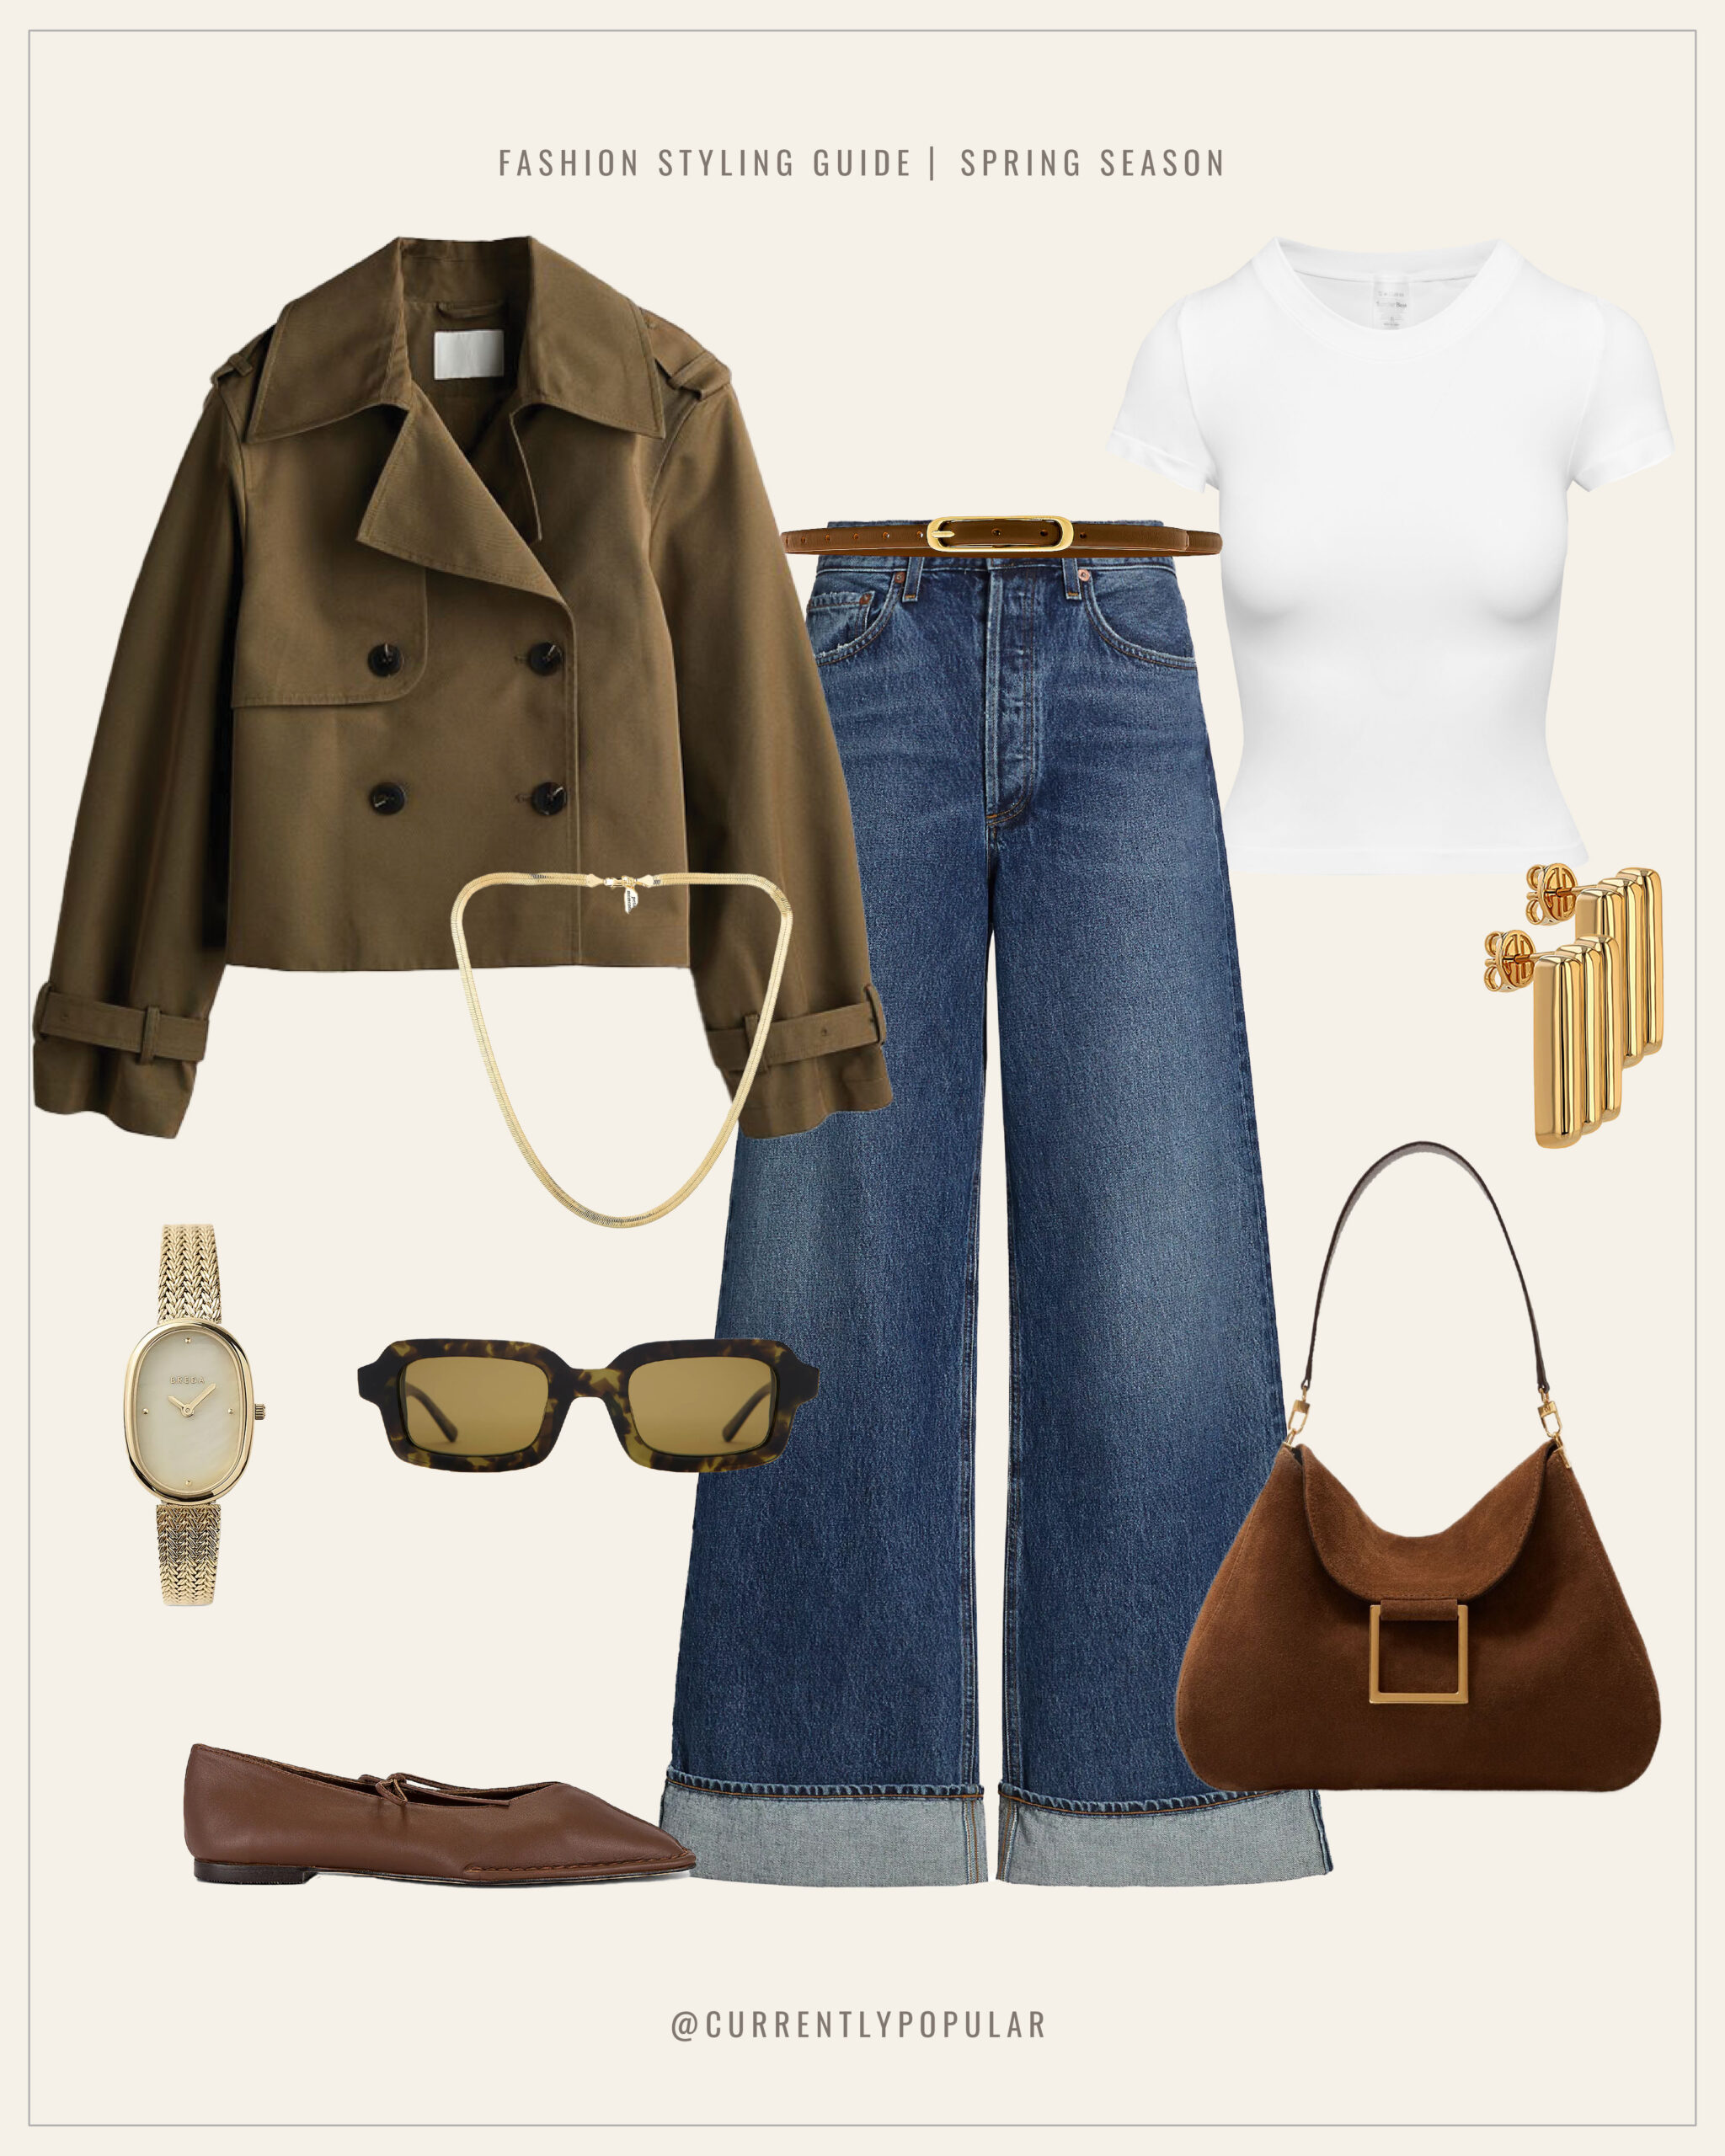 Fashion styling guide for the spring season displaying a chic outfit combination. The look includes a dark olive cropped trench coat, paired with a snug white T-shirt and high-waisted blue jeans, cinched with a thin brown belt featuring a gold buckle. Accessories include a sleek gold mesh-band watch, tortoiseshell sunglasses, a set of gold cuff bracelets, and pointed brown leather flats. The outfit is complemented with a brown suede handbag with a large square buckle on the strap. The text '@currentlypopular' indicates the source of the fashion guide.